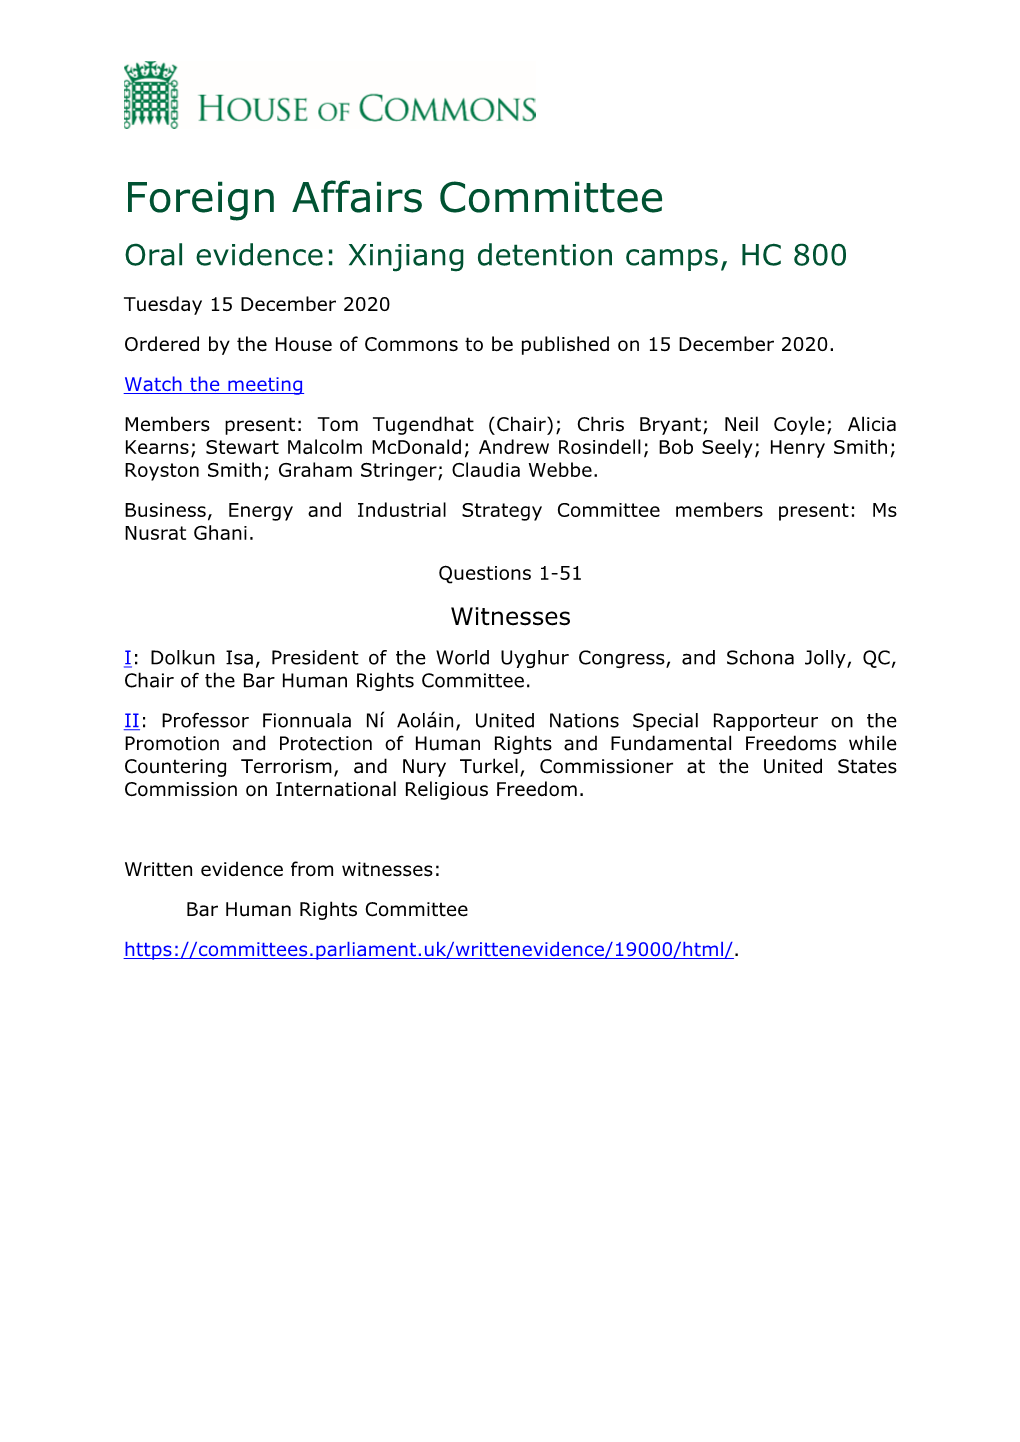 Foreign Affairs Committee Oral Evidence: Xinjiang Detention Camps, HC 800